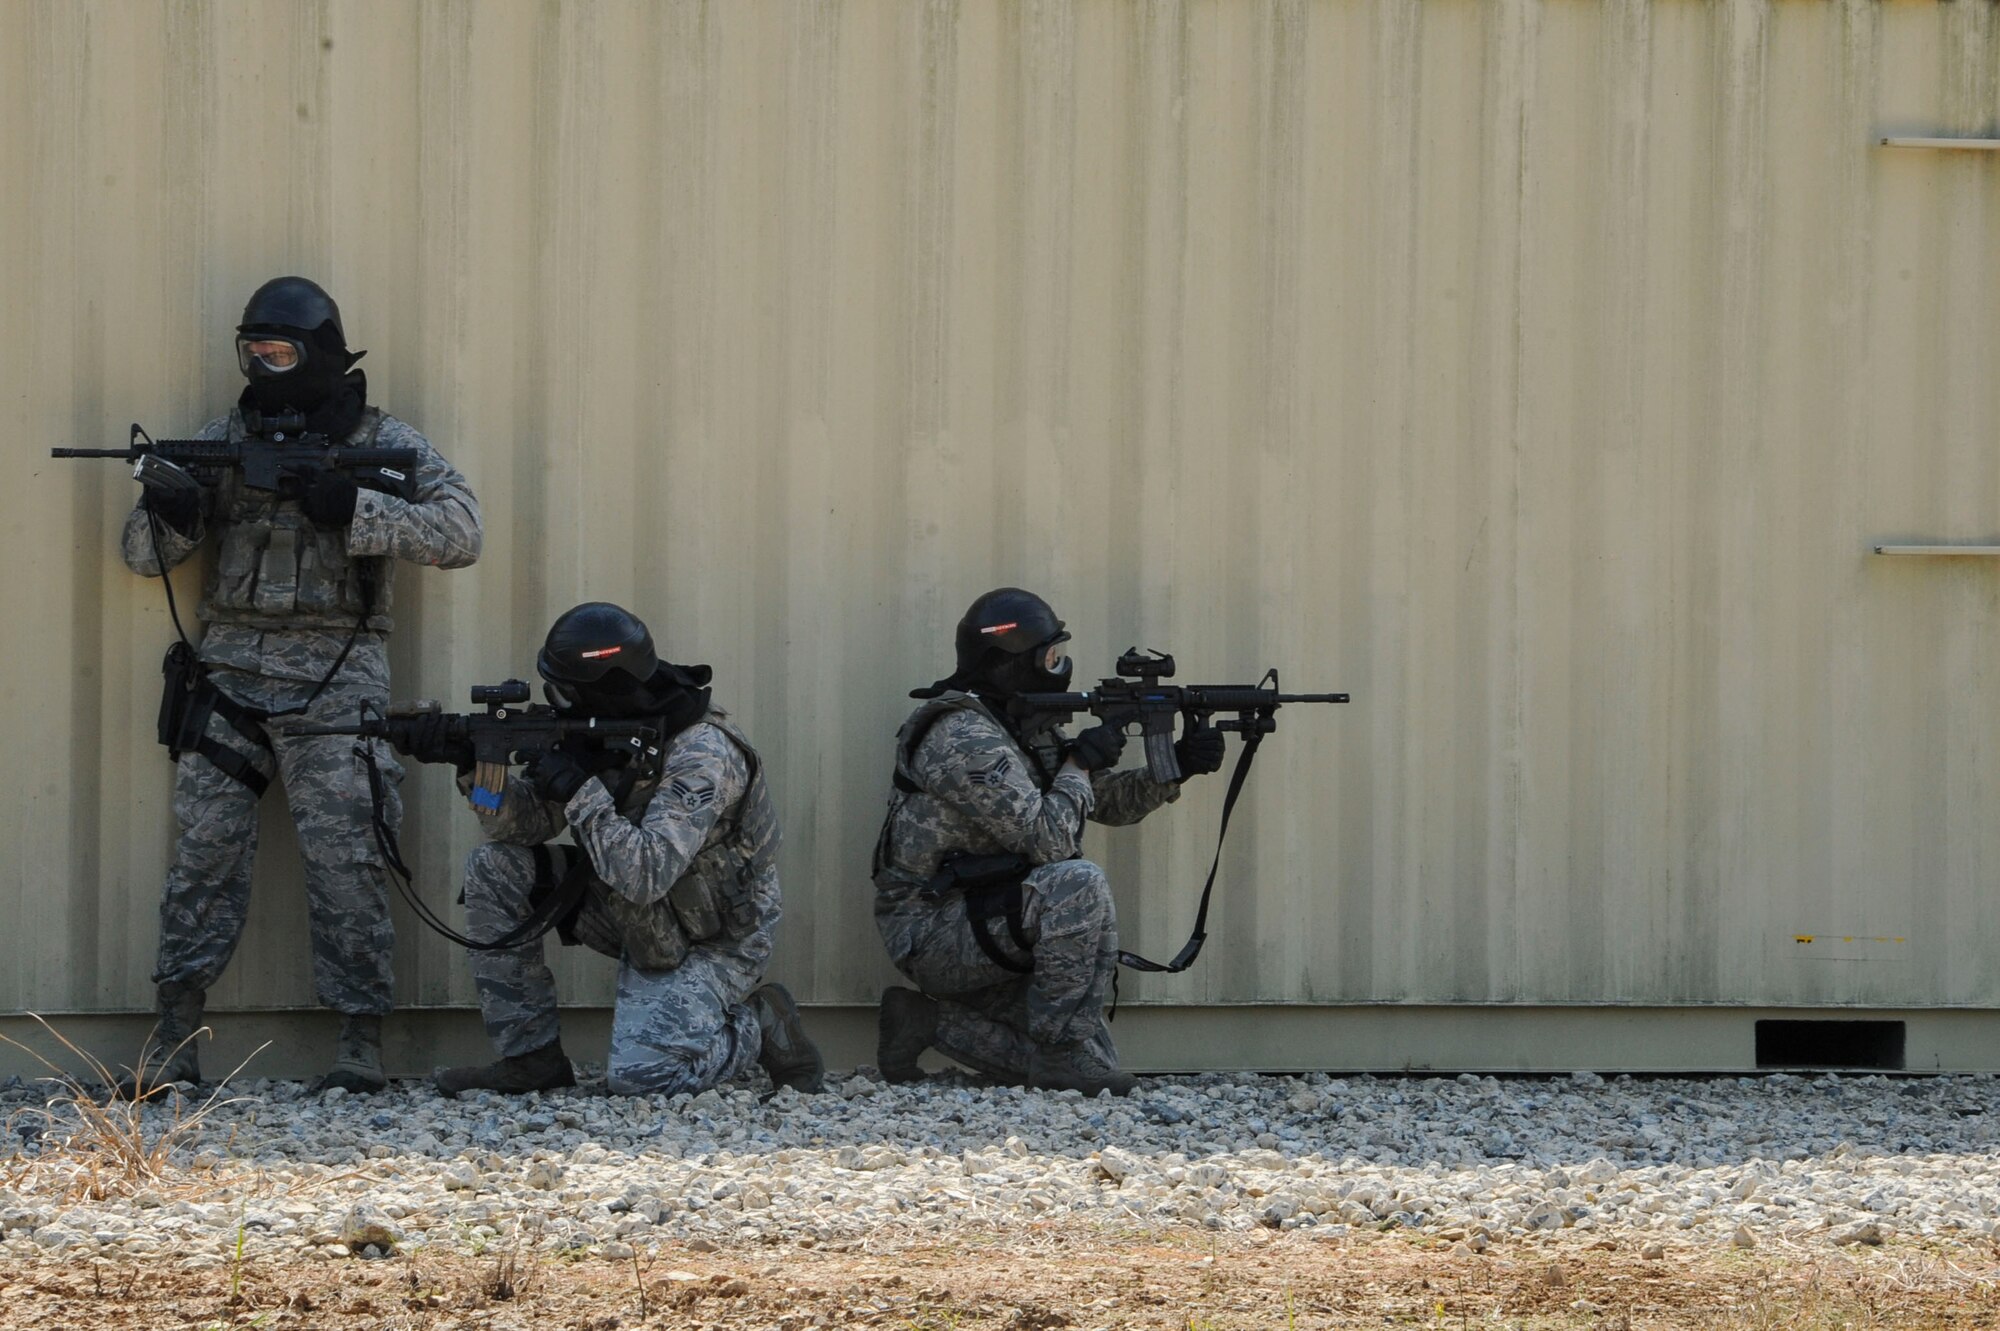 Defenders from the 19th Security Forces Squadron participate in force-on-force training Oct. 12, 2016, at Little Rock Air Force Base, Ark. Force-on-force training is an annual requirement to prepare security forces members for deployments and combat operations. (U.S. Air Force photo by Senior Airman Stephanie Serrano)